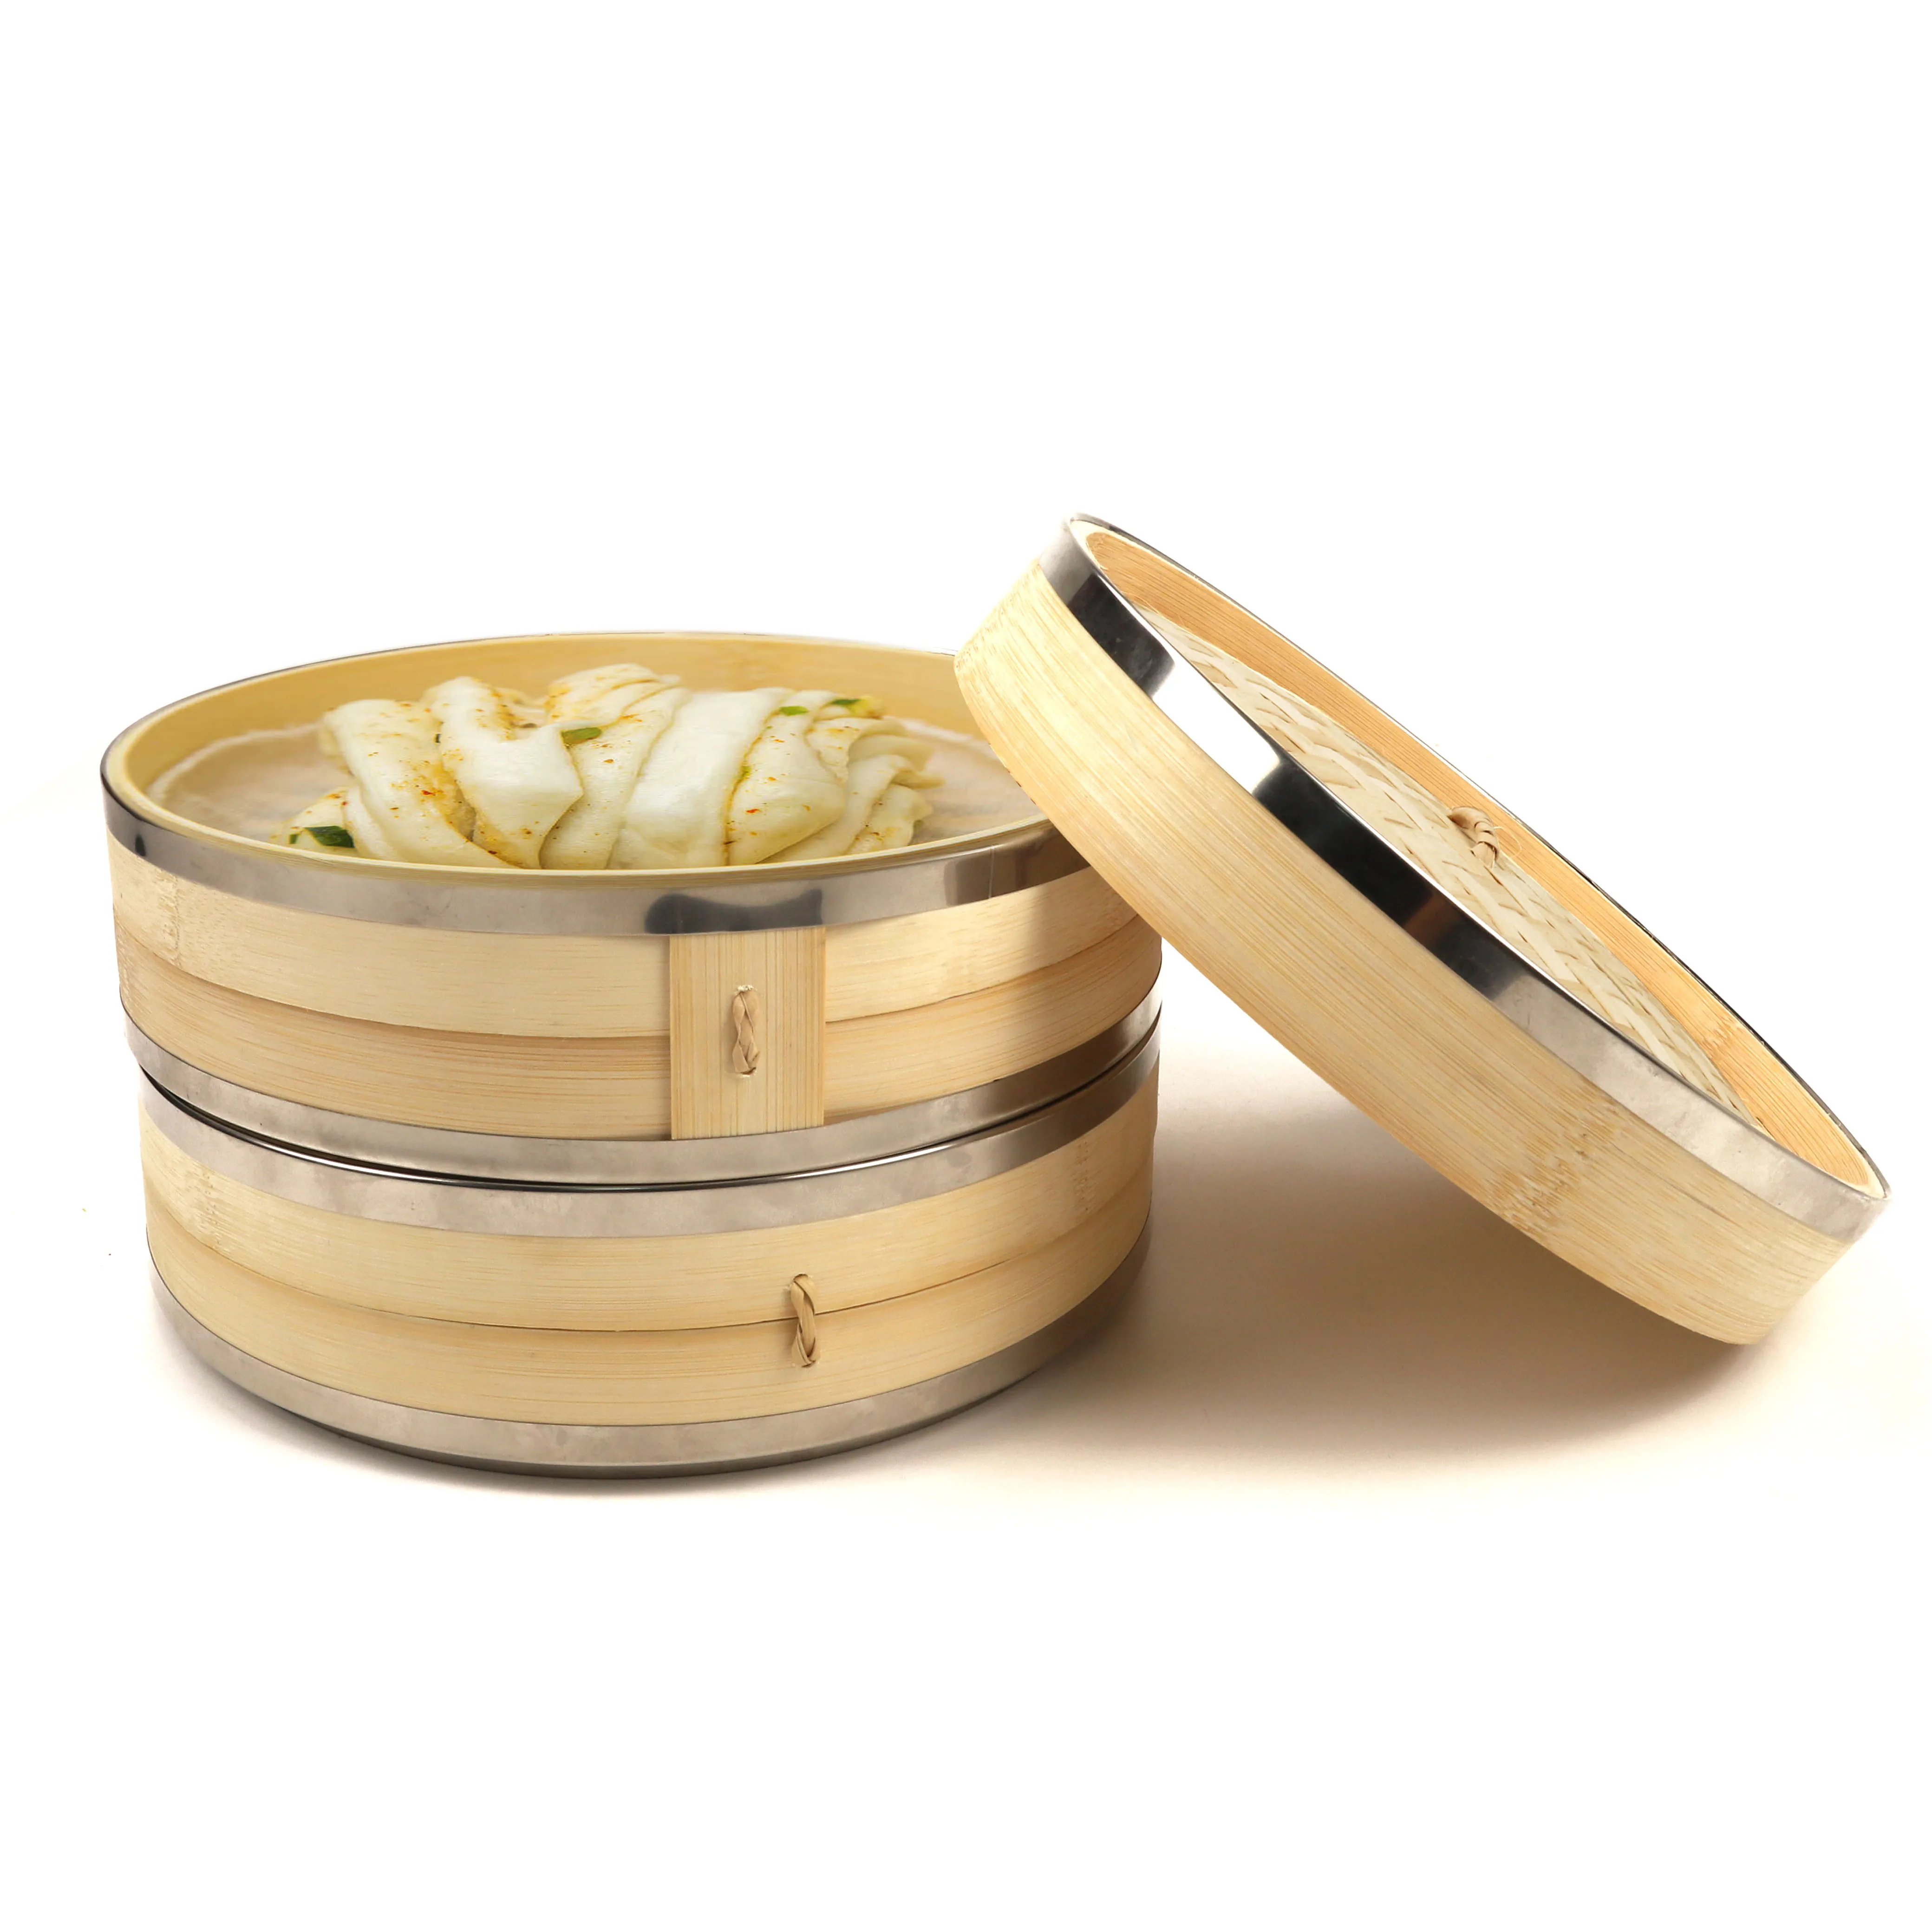 
Natural Kitchen 2 Tier Bamboo Round Steamer Wooden Dumpling Steamer with Lid Fish Cooking Vegetables Snack Basket Tools  (1600105508351)